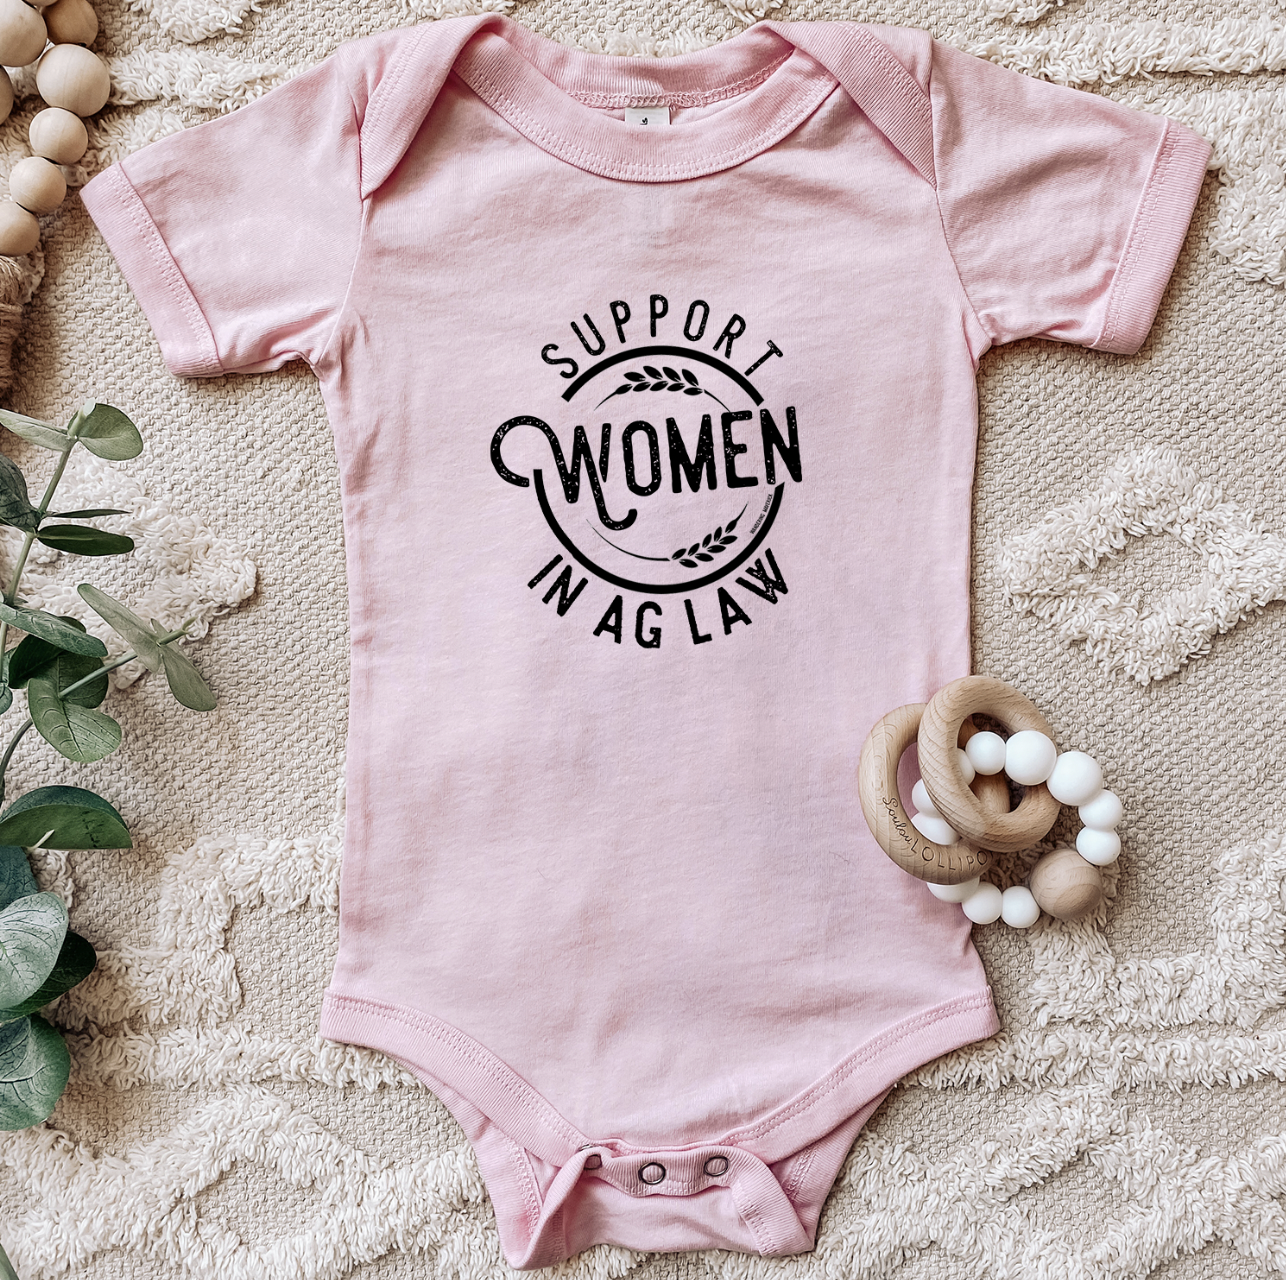 Support Women In Ag Law One Piece/T-Shirt (Newborn - Youth XL) - Multiple Colors!